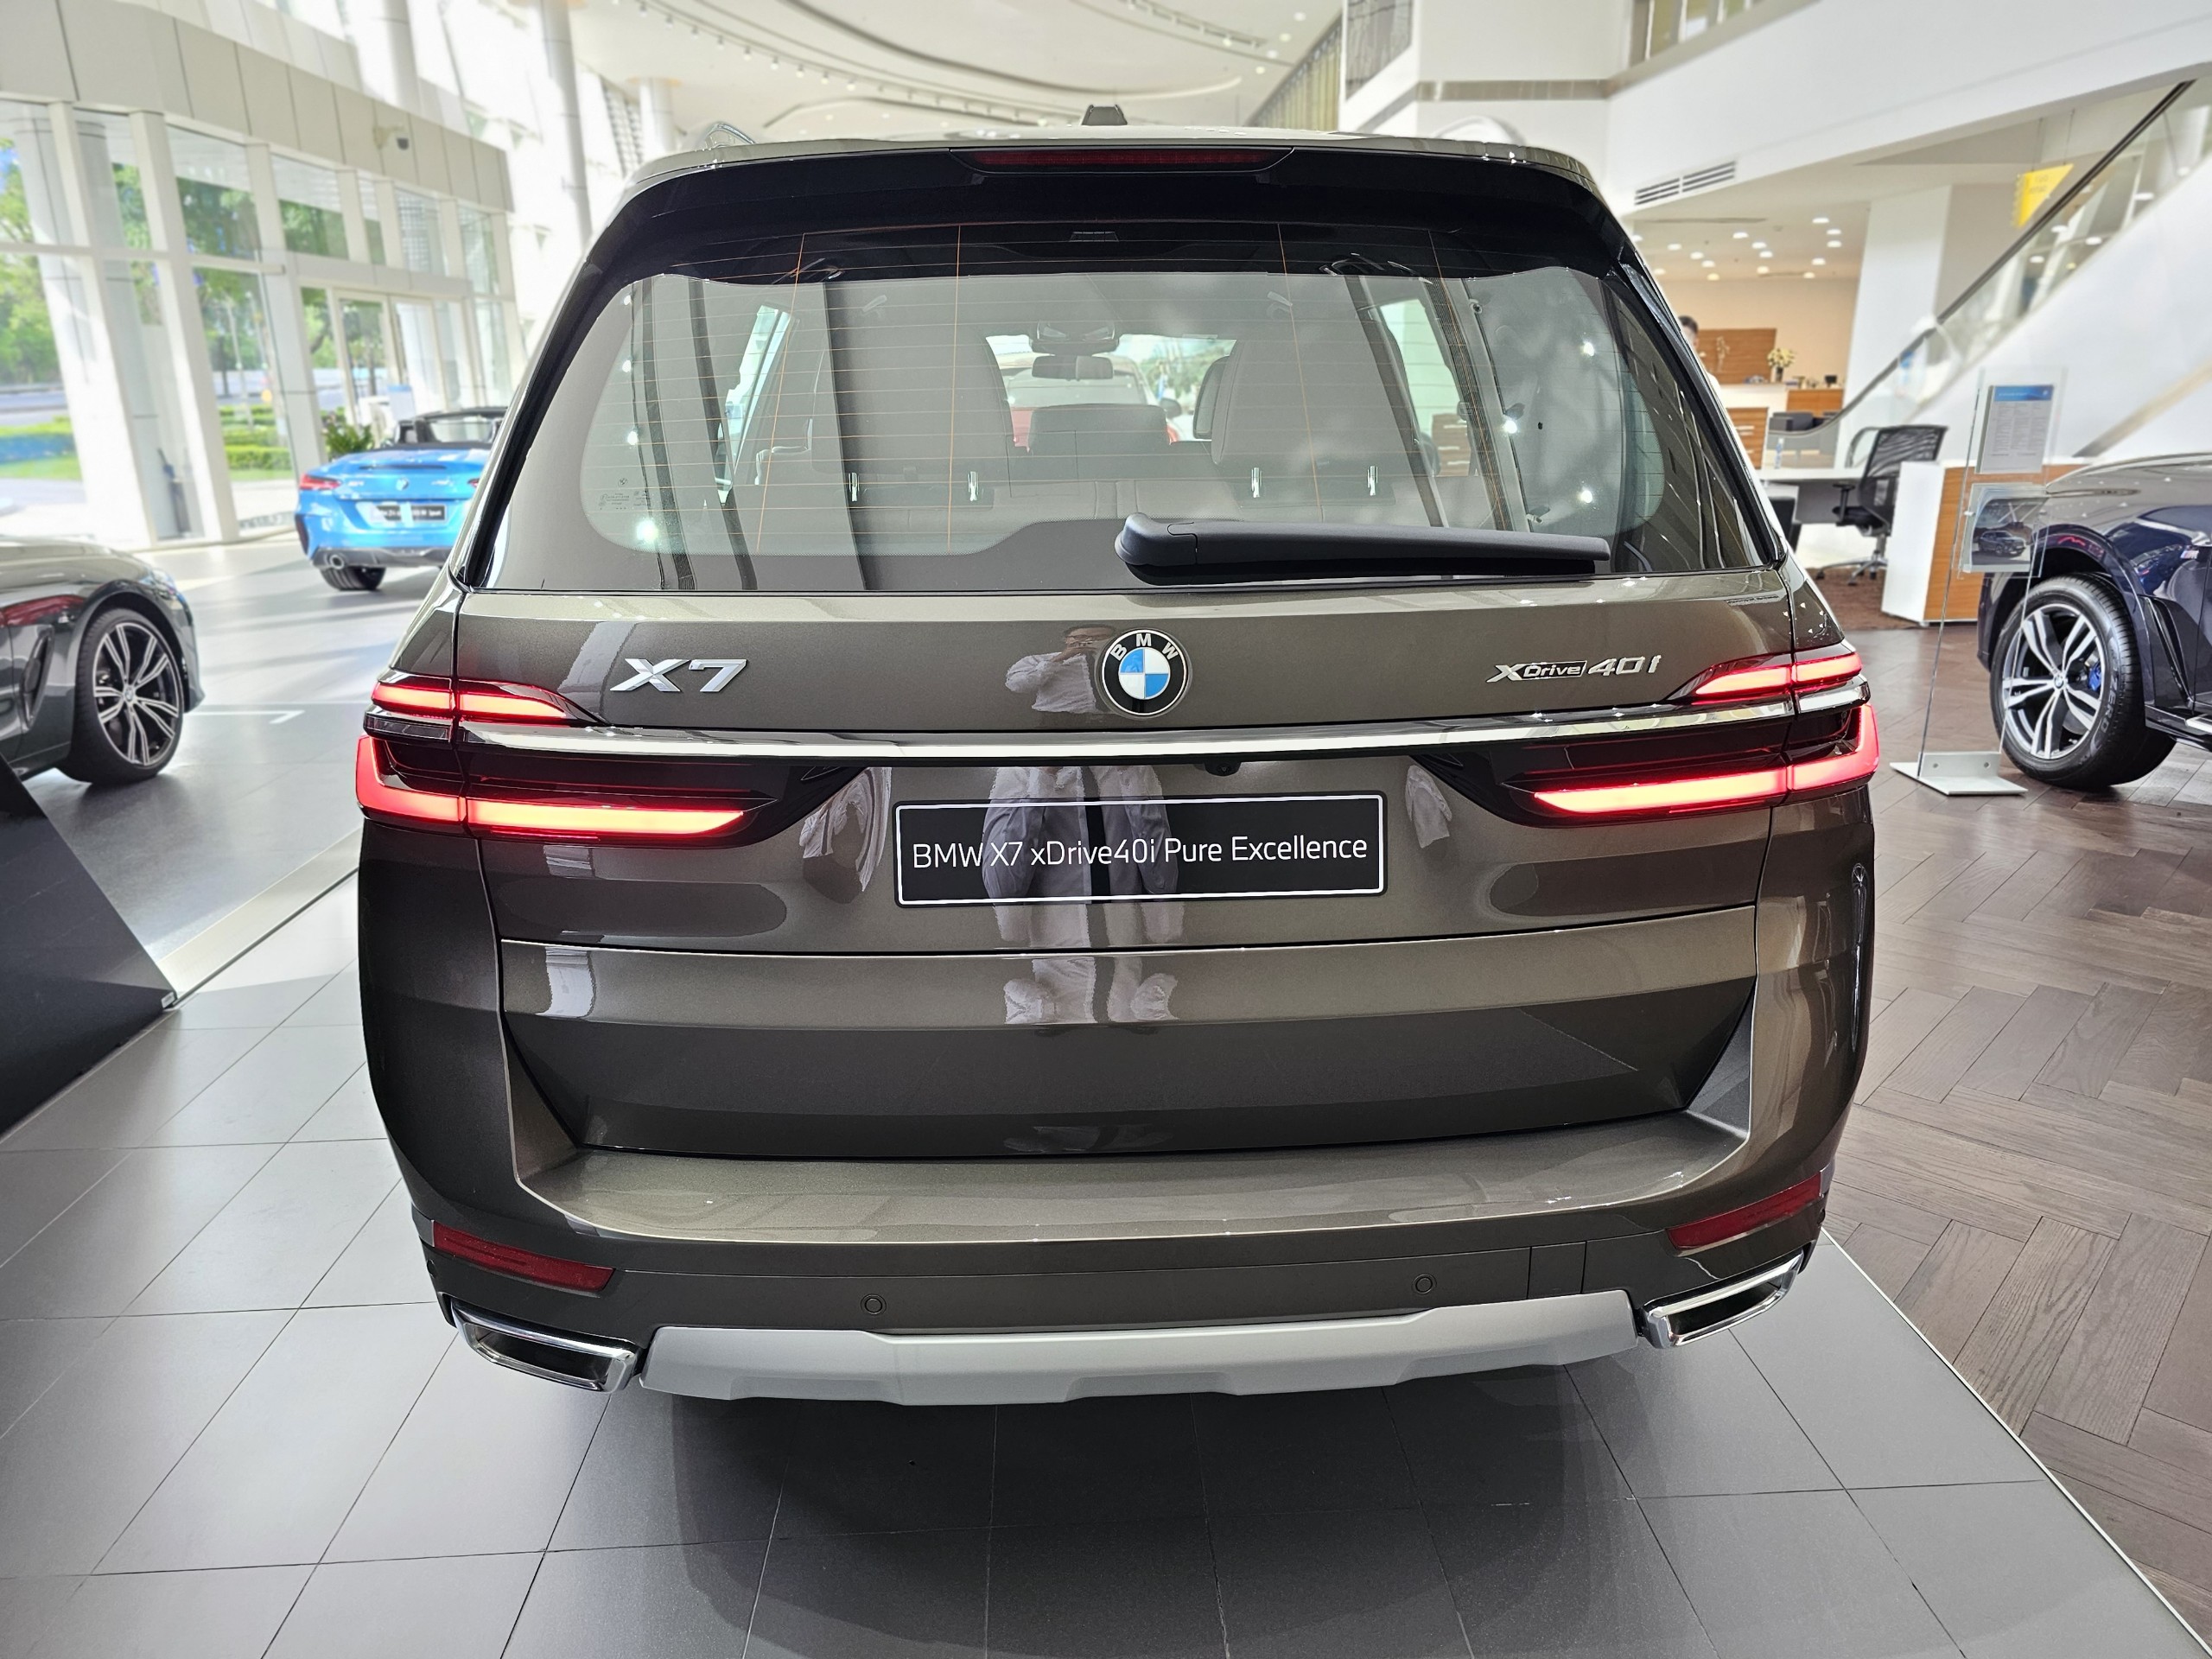 BMW X7 Pure Excellence 2023 10 BMW X7 xDrive40i Pure Excellence 2023